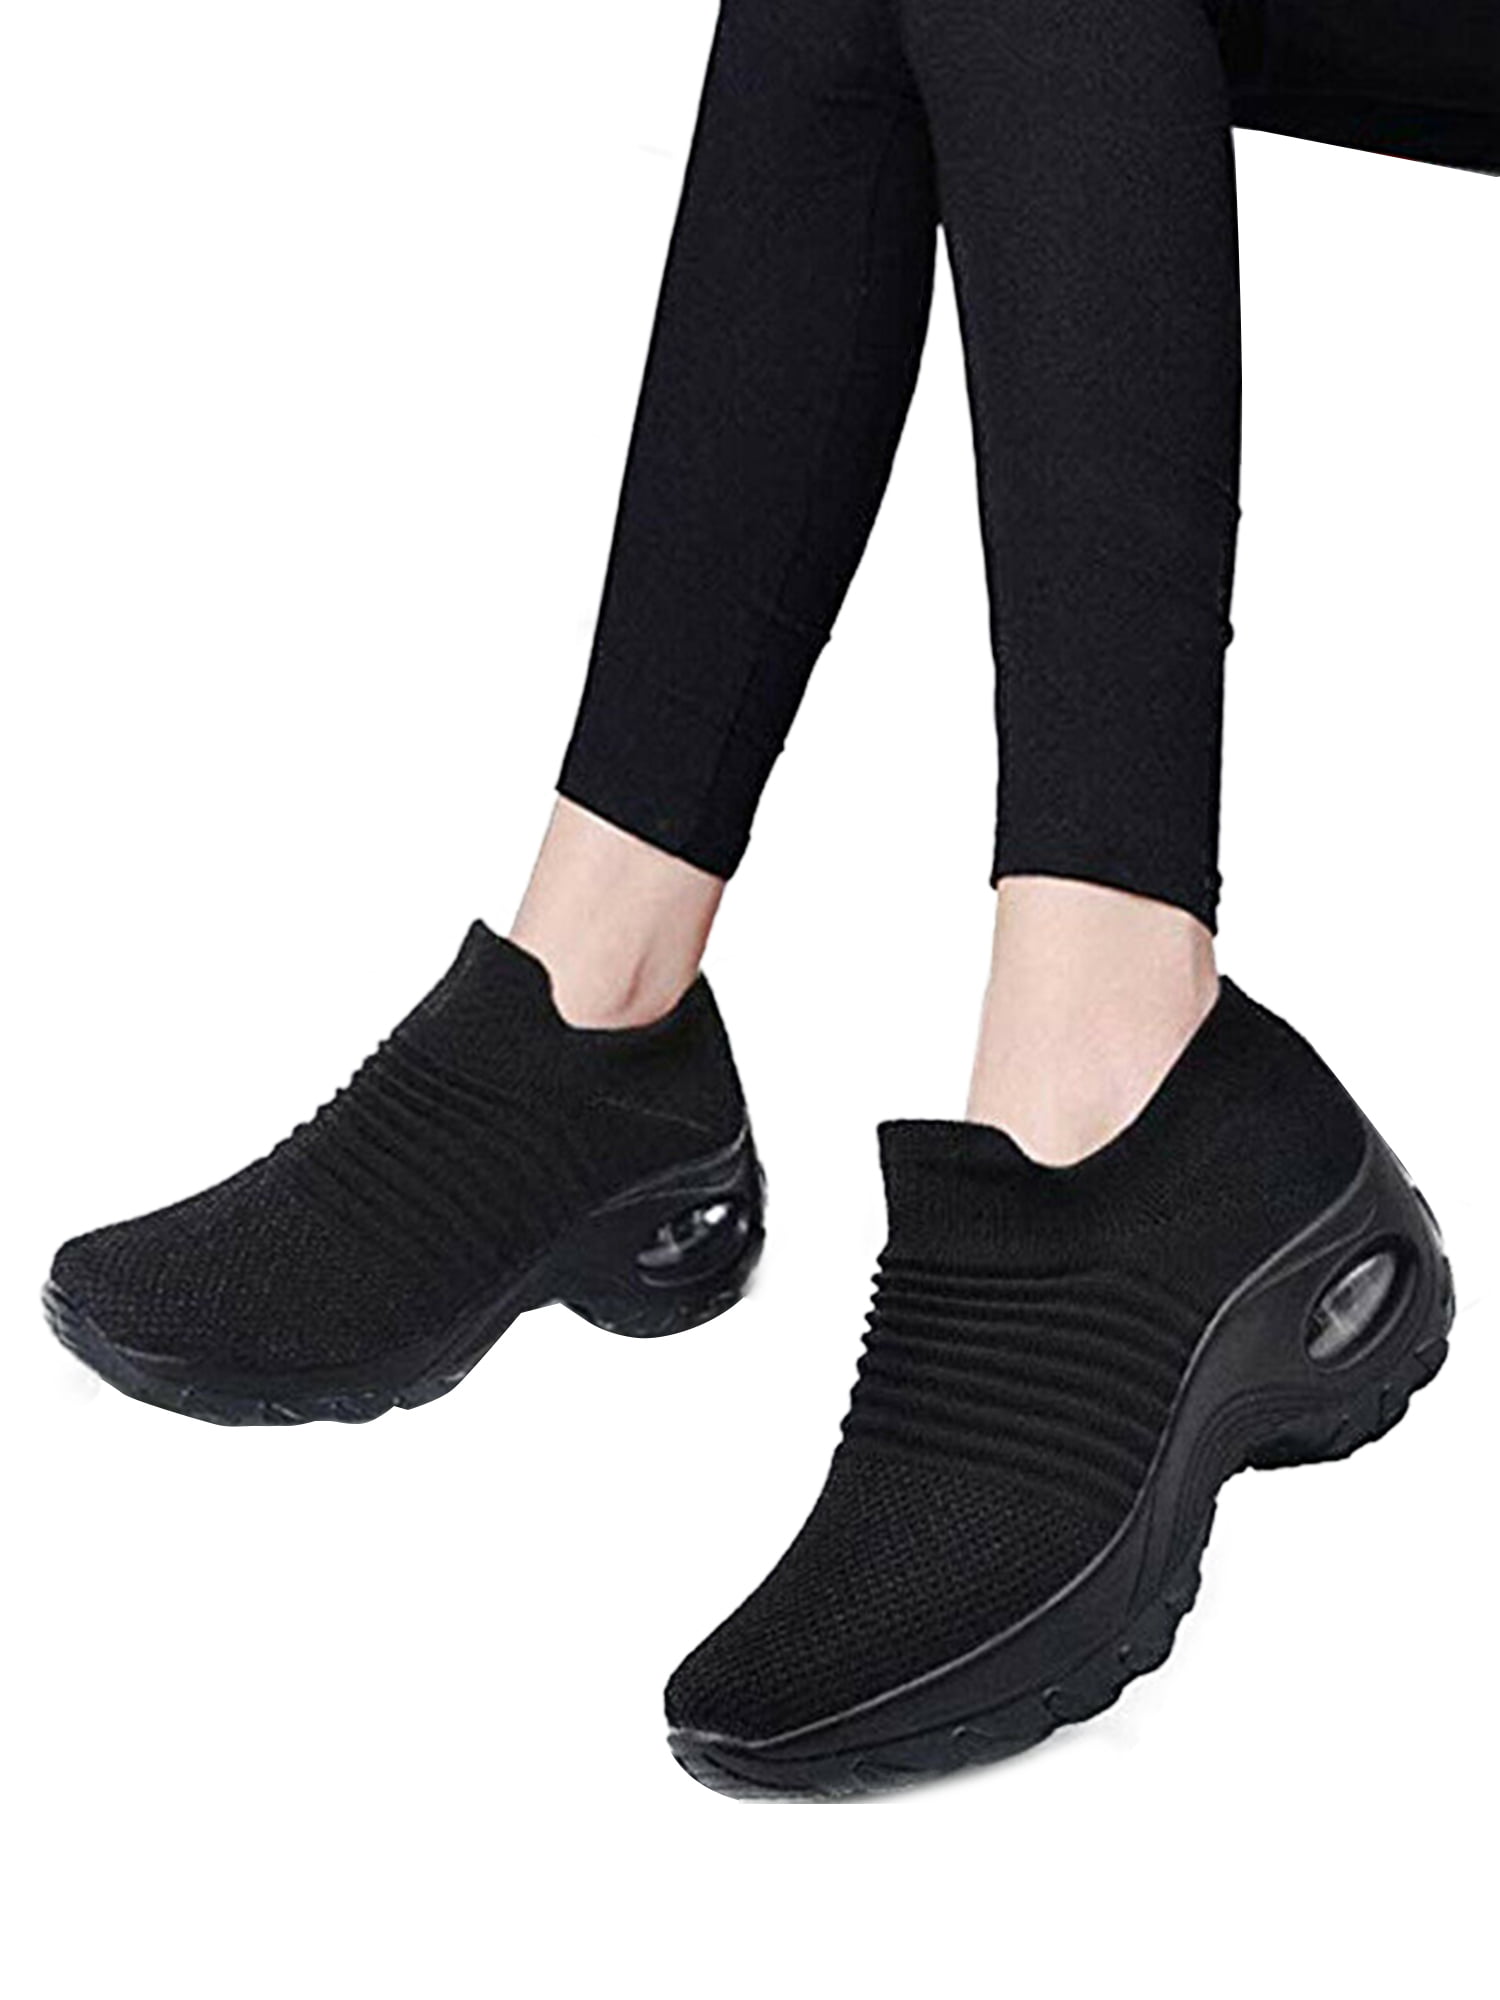 Midress Womens Fashion Mesh Breathable Sports Shoes Outdoor Fitness Running Athletic Sneakers Shoes Non-Slip Plus Size